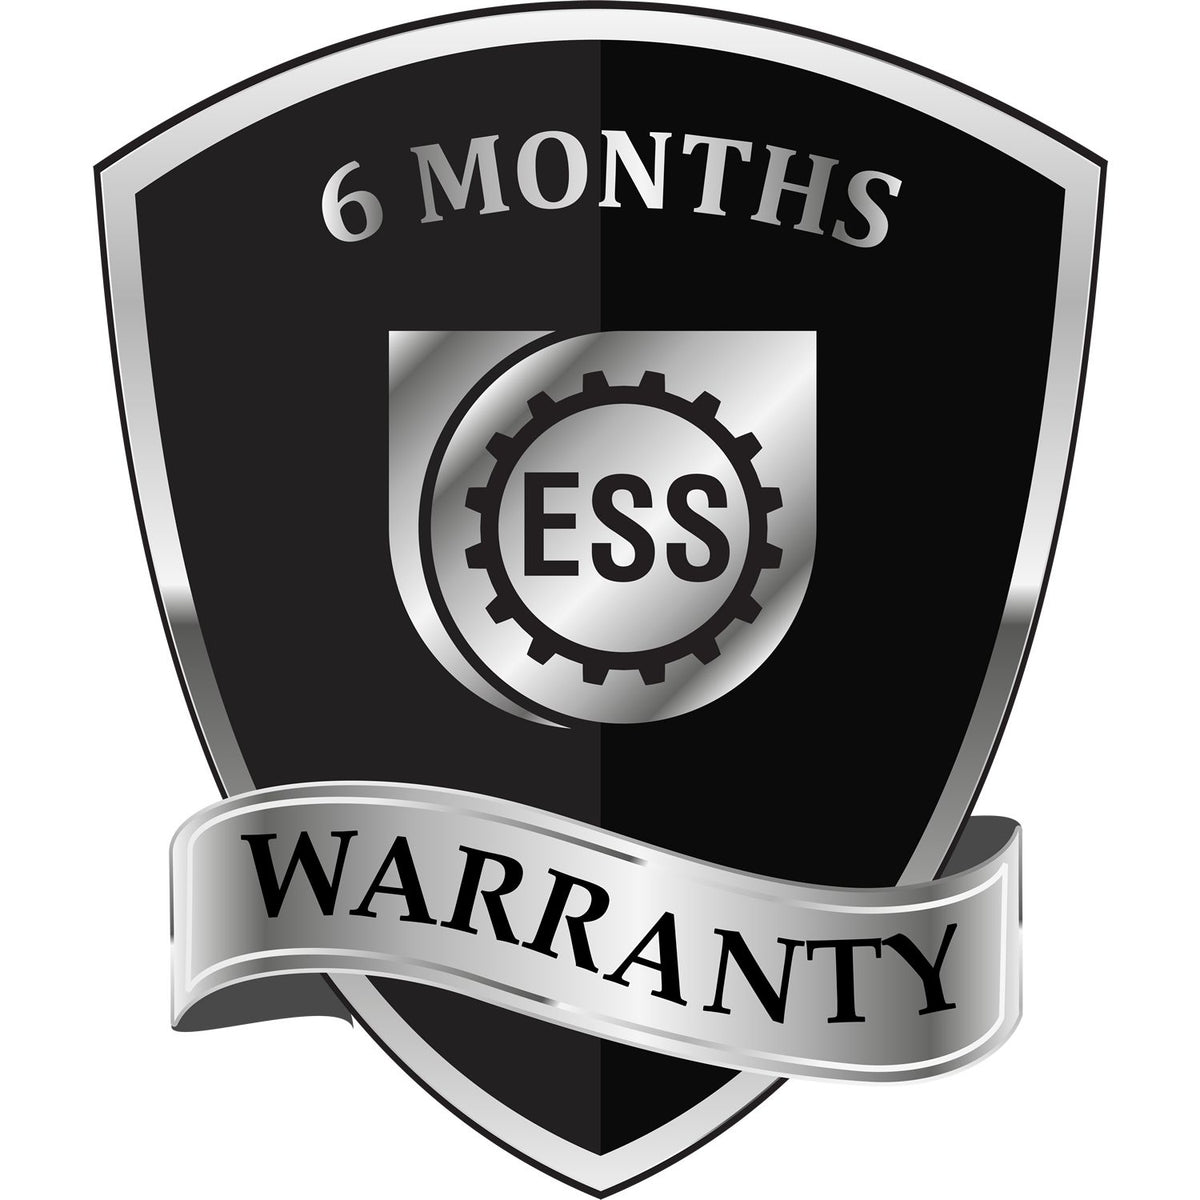 A badge or emblem showing a warranty icon for the PSI Washington Notary Stamp